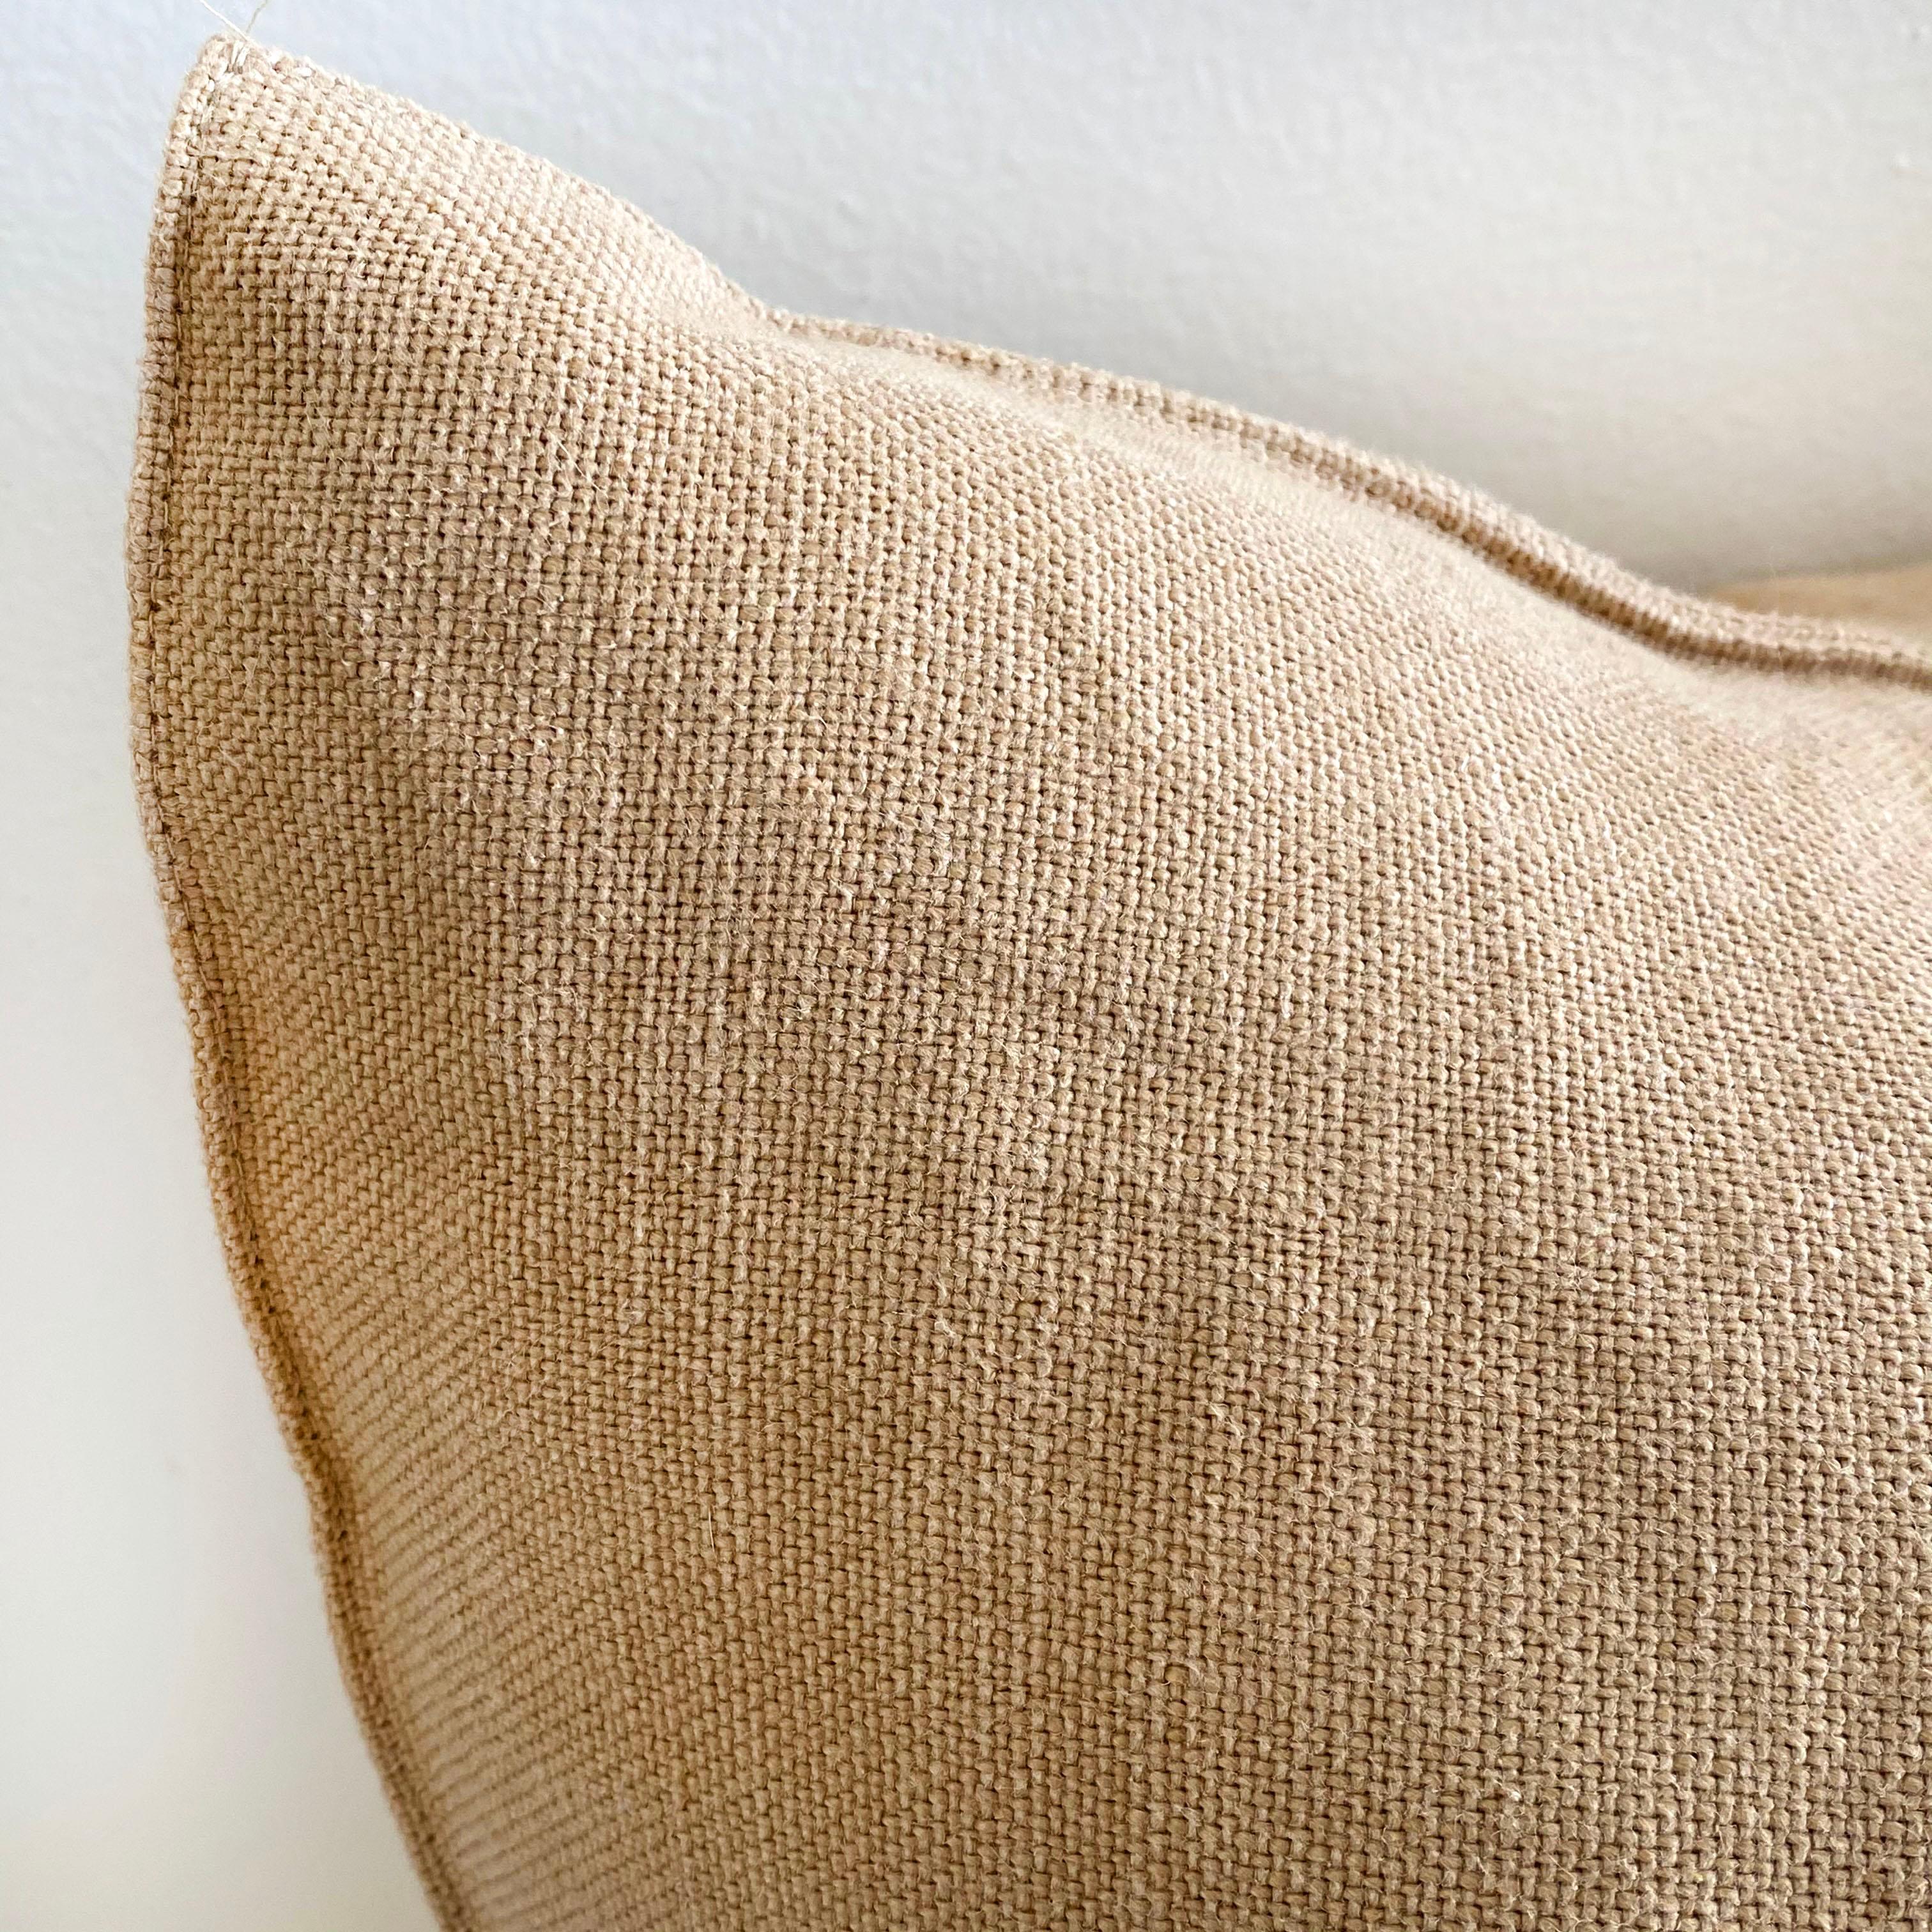 Belgian linen accent pillow in nude apricot color
This 20 x 20 accent pillow has a sham back closure.
this is for the cover only.
Insert is not included.